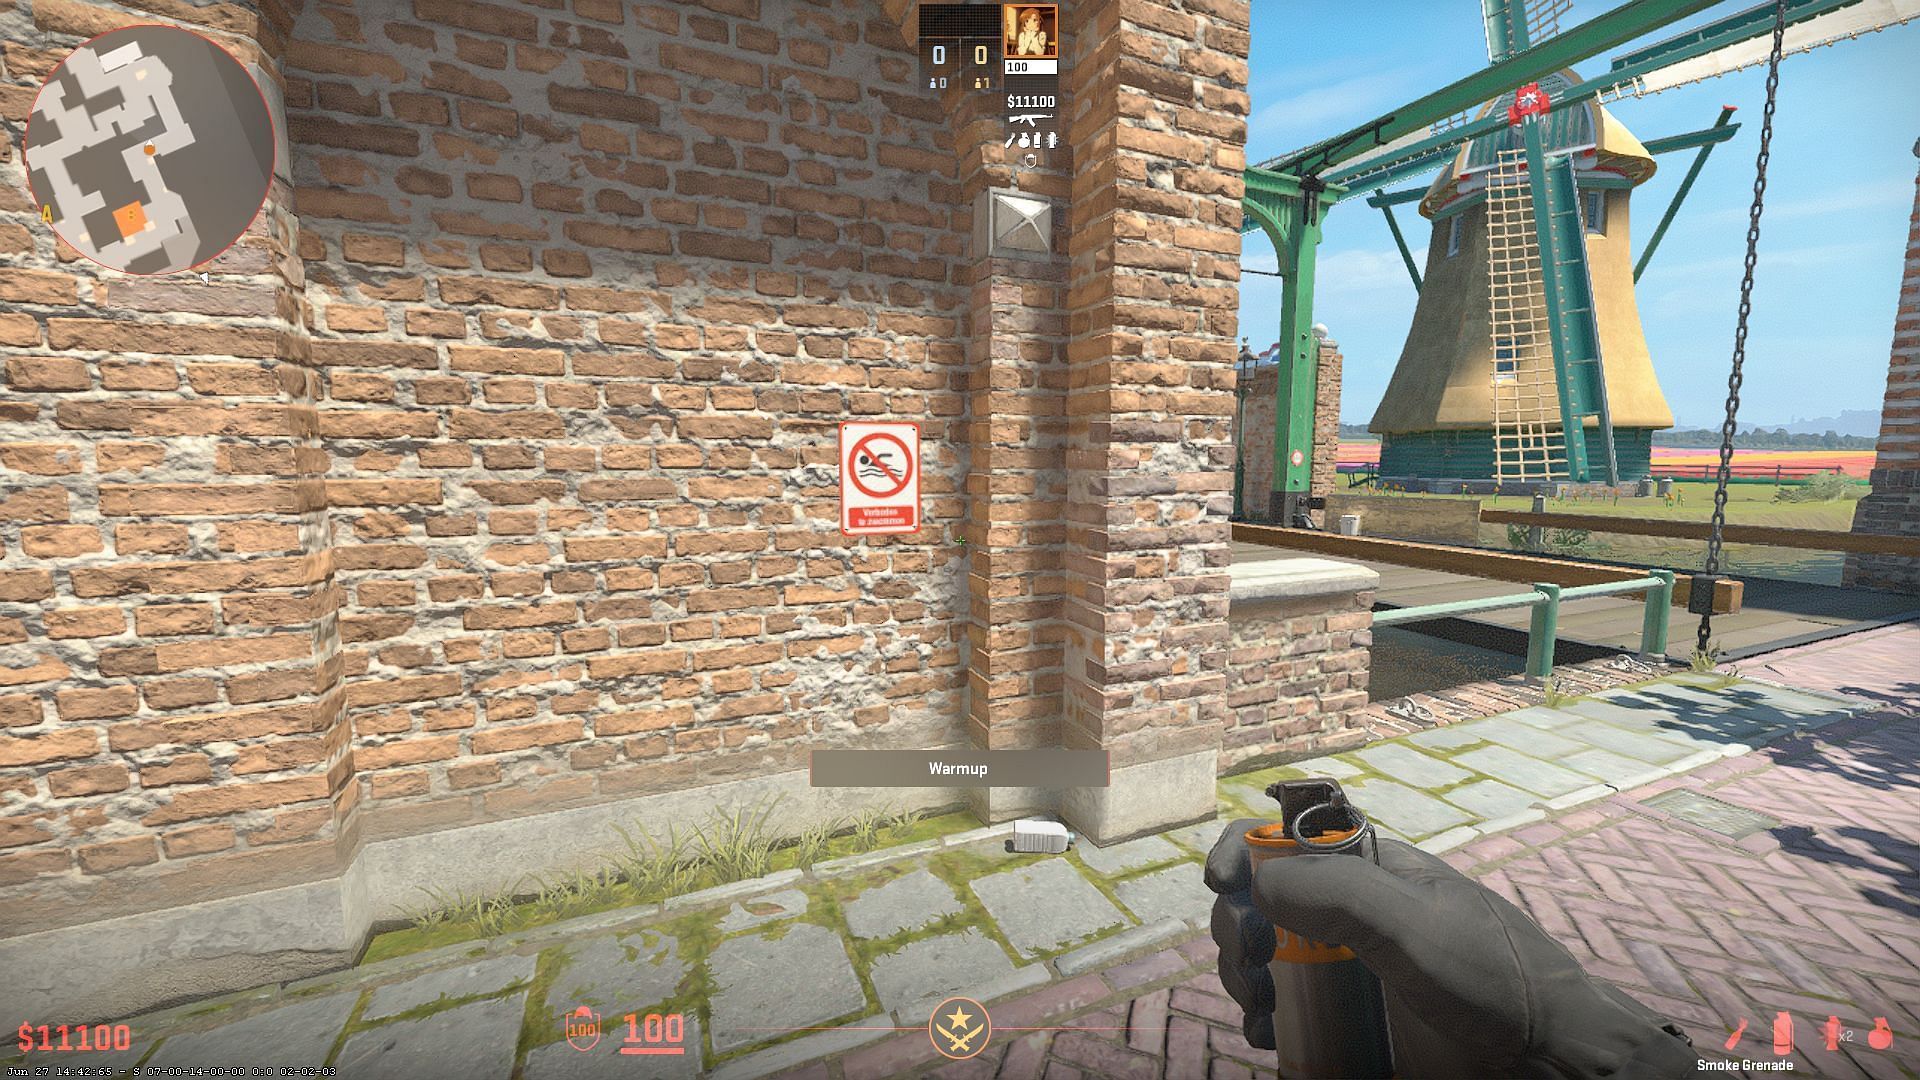 Stand near the warning sign (Image via Valve)